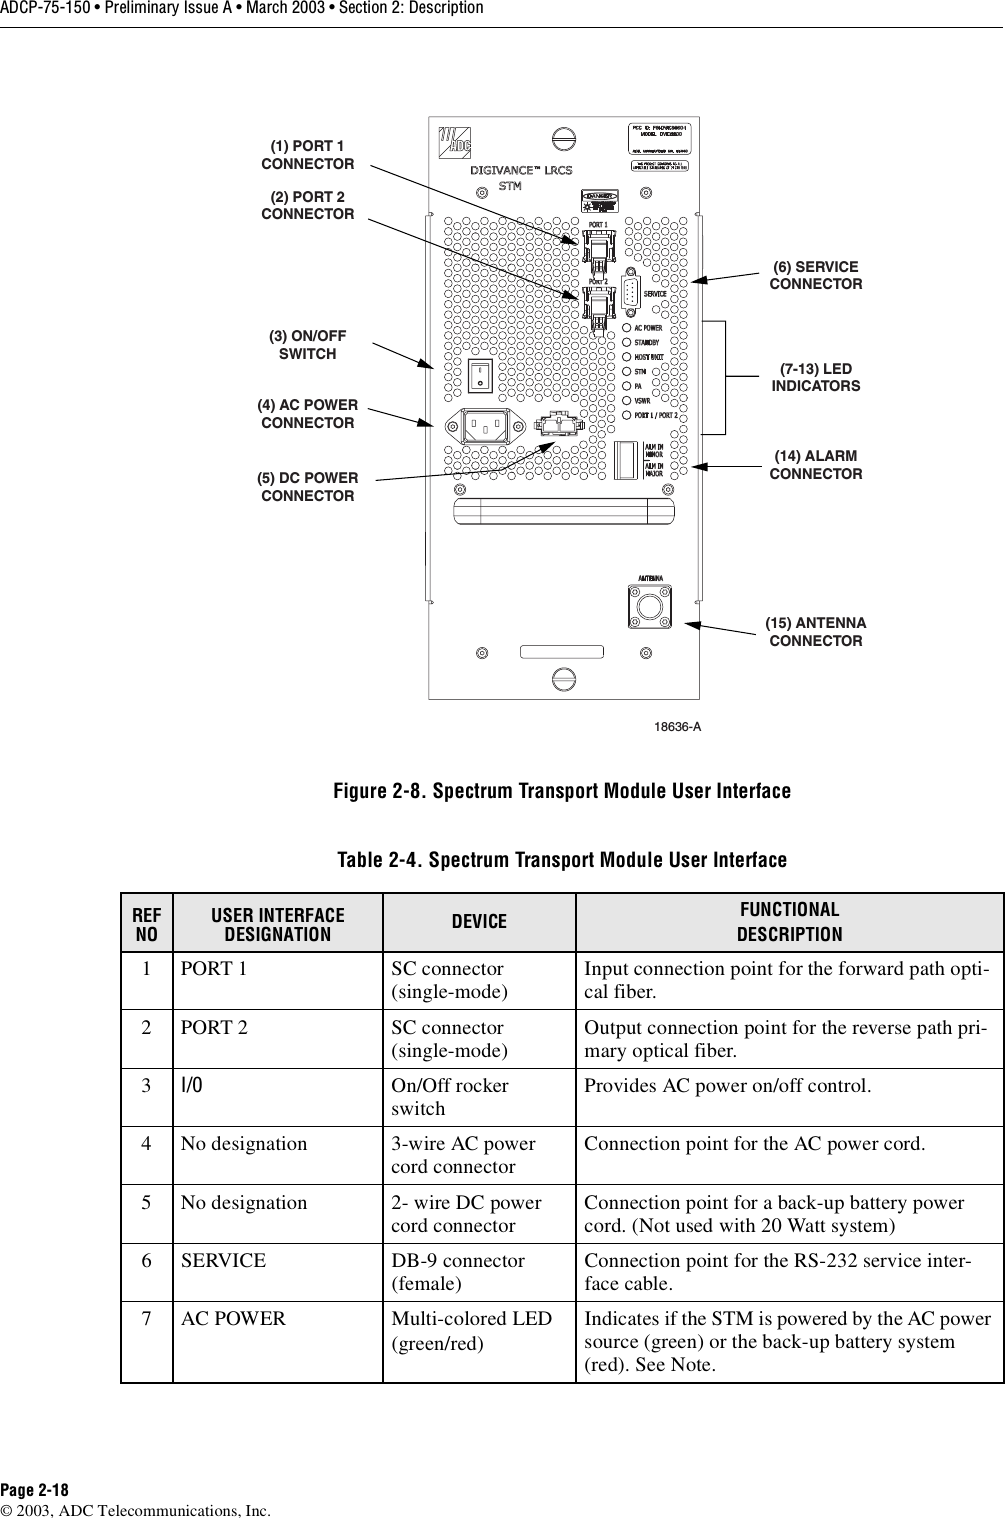 ADCP-75-150 • Preliminary Issue A • March 2003 • Section 2: DescriptionPage 2-18©2003, ADC Telecommunications, Inc.Figure 2-8. Spectrum Transport Module User InterfaceTable 2-4. Spectrum Transport Module User InterfaceREF NOUSER INTERFACE DESIGNATION DEVICE FUNCTIONALDESCRIPTION1PORT1SCconnector(single-mode) Input connection point for the forward path opti-cal fiber.2PORT2SCconnector(single-mode) Output connection point for the reverse path pri-mary optical fiber.3I/0 On/Off rockerswitch Provides AC power on/off control.4Nodesignation 3-wire AC powercord connector Connection point for the AC power cord.5Nodesignation 2- wire DC powercord connector Connection point for aback-up battery powercord. (Not used with 20 Watt system)6 SERVICE DB-9 connector(female) Connection point for the RS-232 service inter-face cable.7ACPOWER Multi-colored LED(green/red)Indicates if the STM is powered by the AC powersource (green) or the back-up battery system(red). See Note.18636-A(3) ON/OFFSWITCH(4) AC POWERCONNECTOR(5) DC POWERCONNECTOR(1) PORT 1CONNECTOR(2) PORT 2CONNECTOR(6) SERVICECONNECTOR(7-13) LEDINDICATORS(14) ALARMCONNECTOR(15) ANTENNACONNECTOR